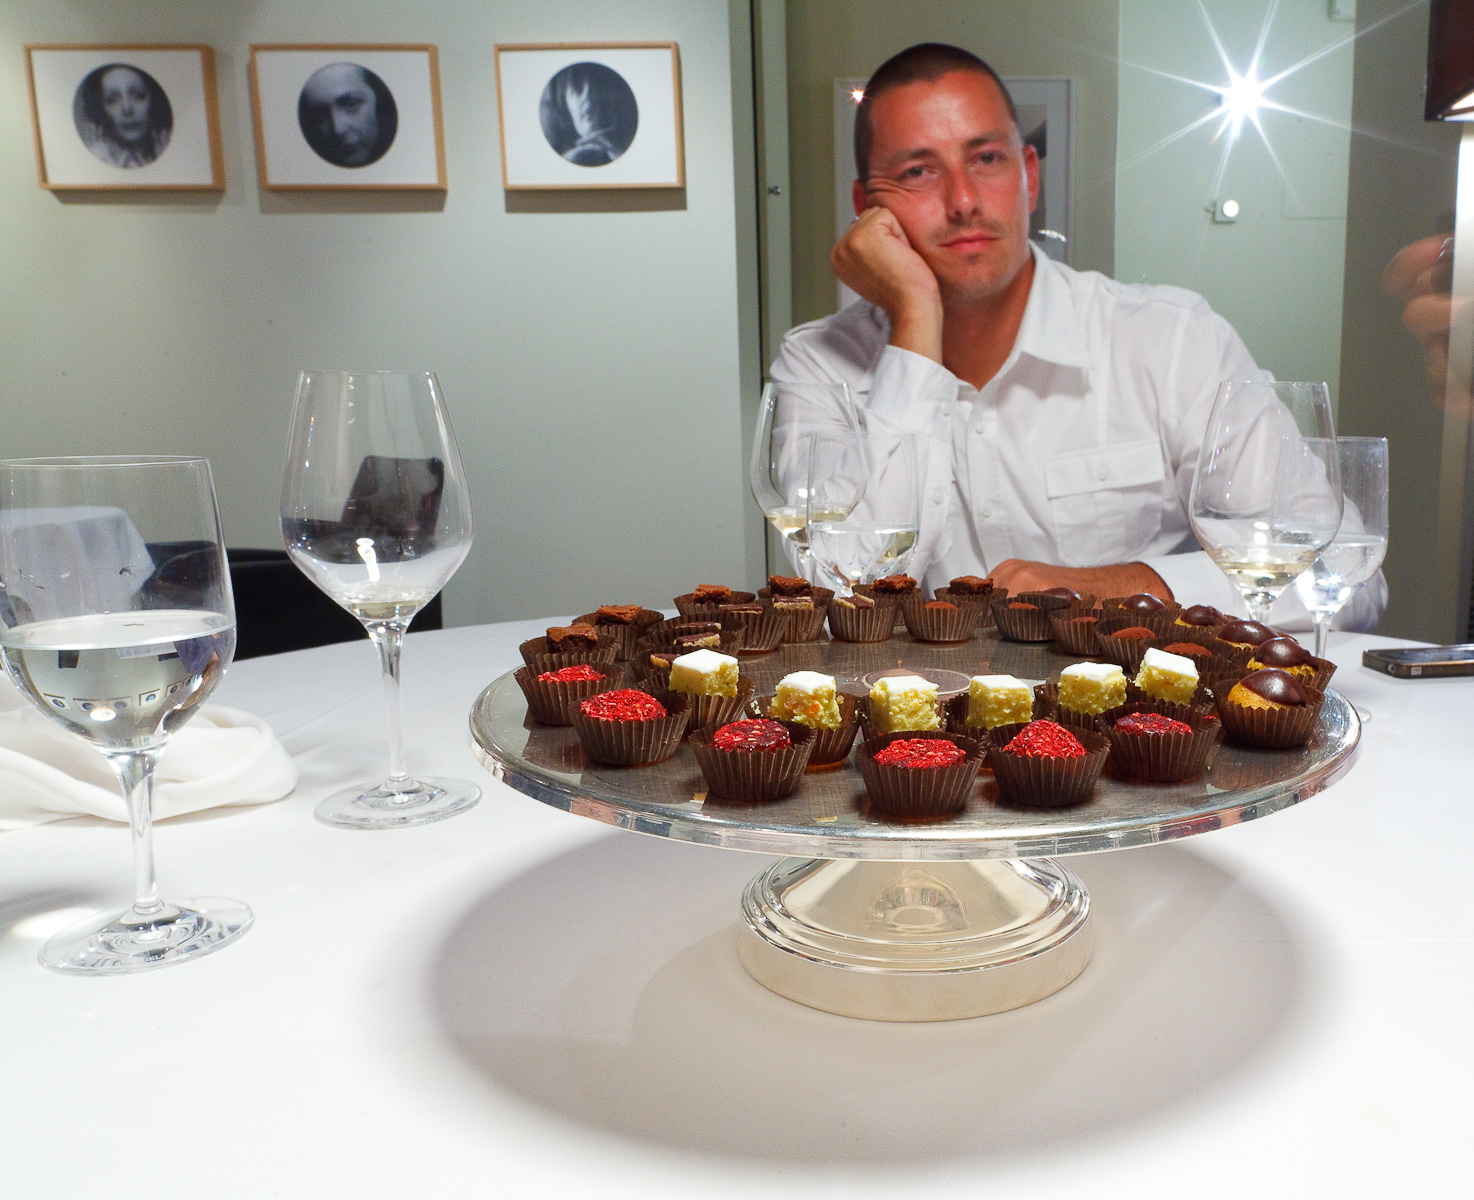 Chef Curtis Duffy after a long meal at Osteria Francescana